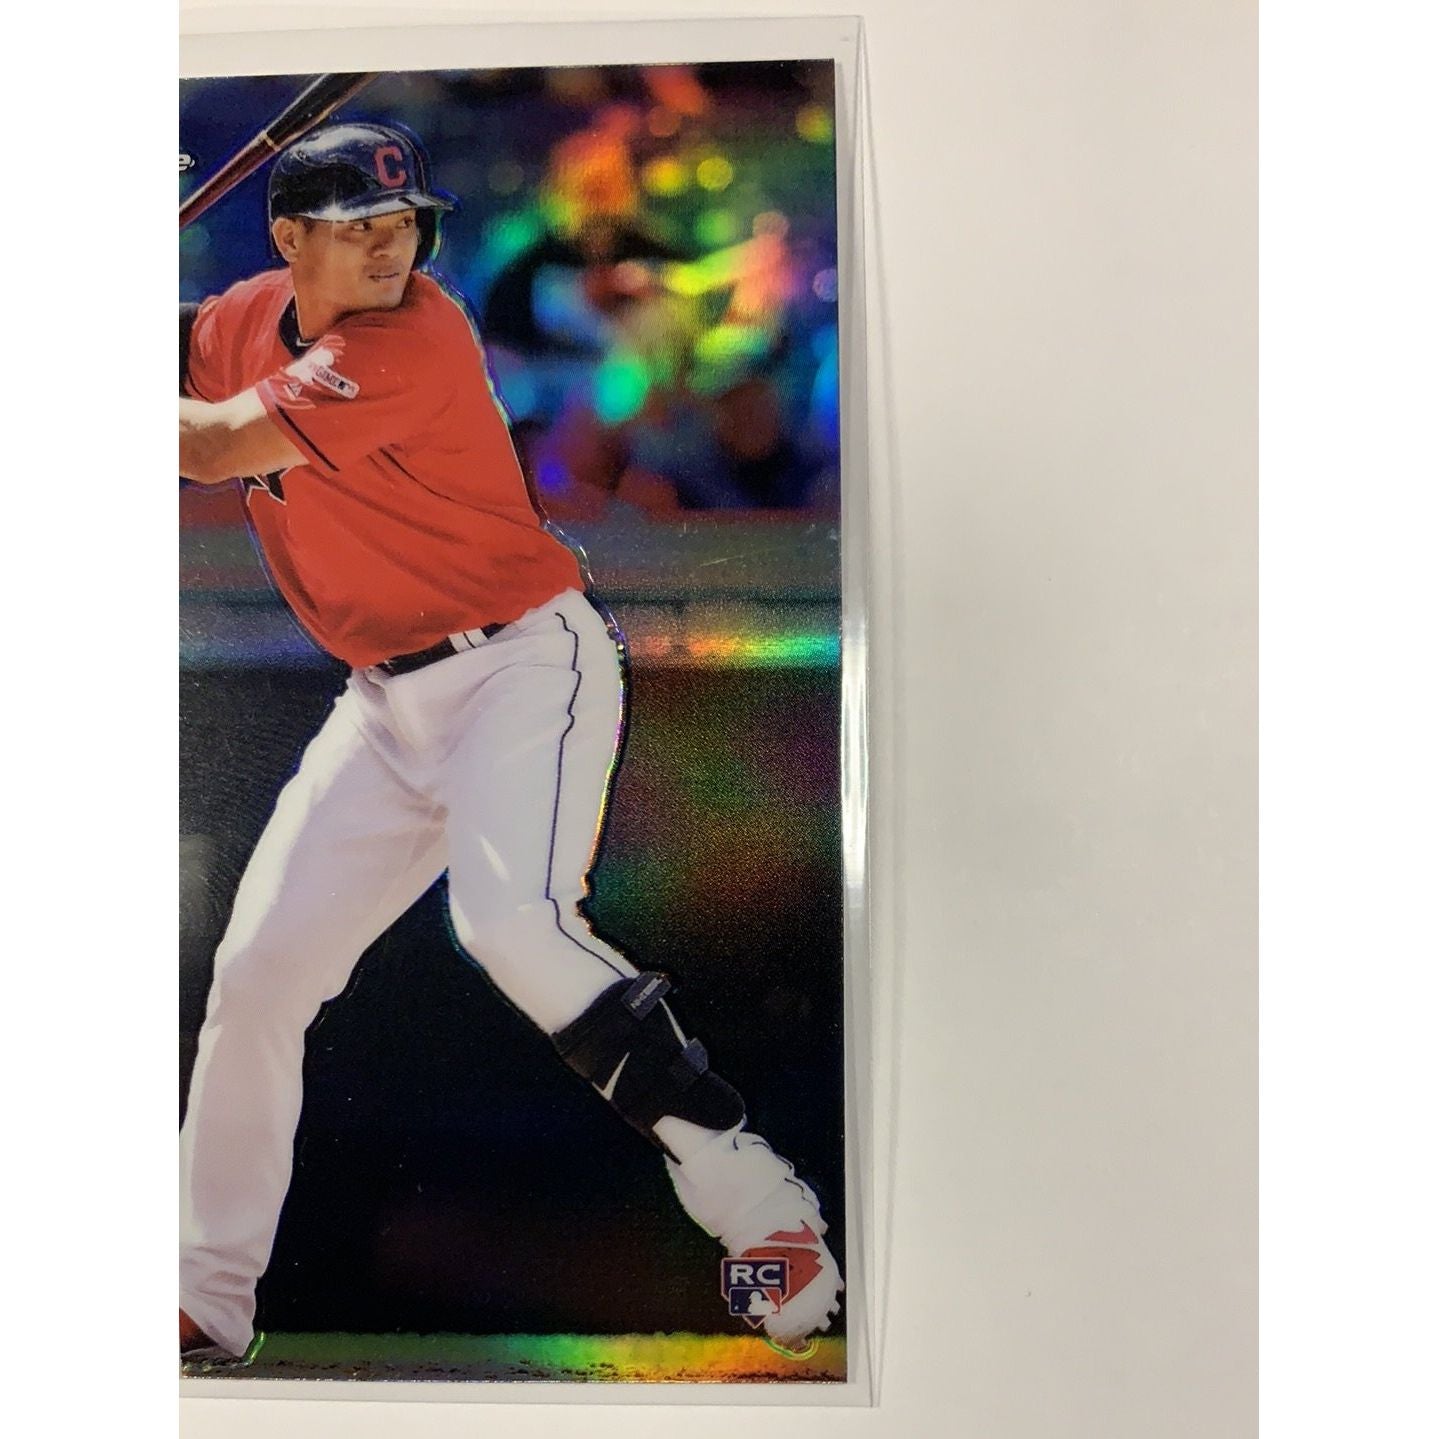  2020 Topps Chrome Yu Chang RC Refractor  Local Legends Cards & Collectibles